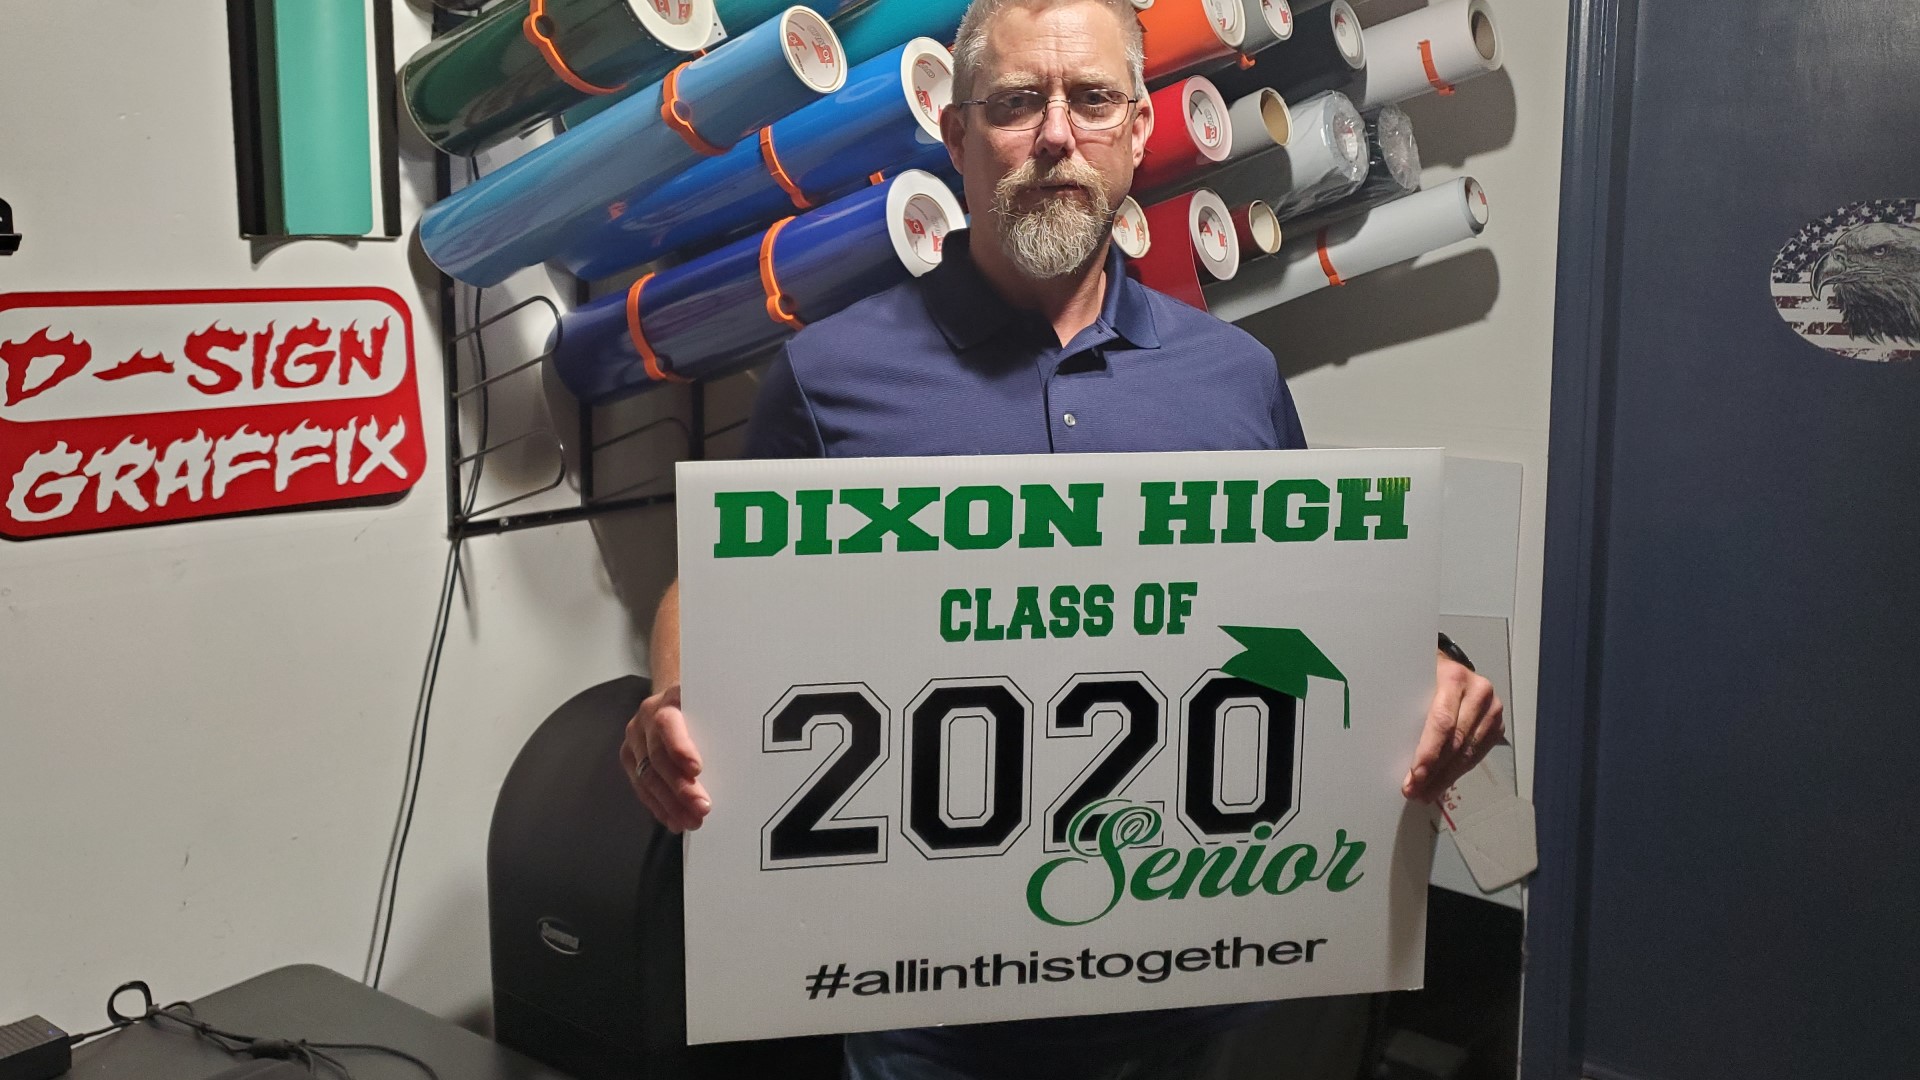 A Dixon man is making sure high school seniors in his town don't go unnoticed in their final year of school.